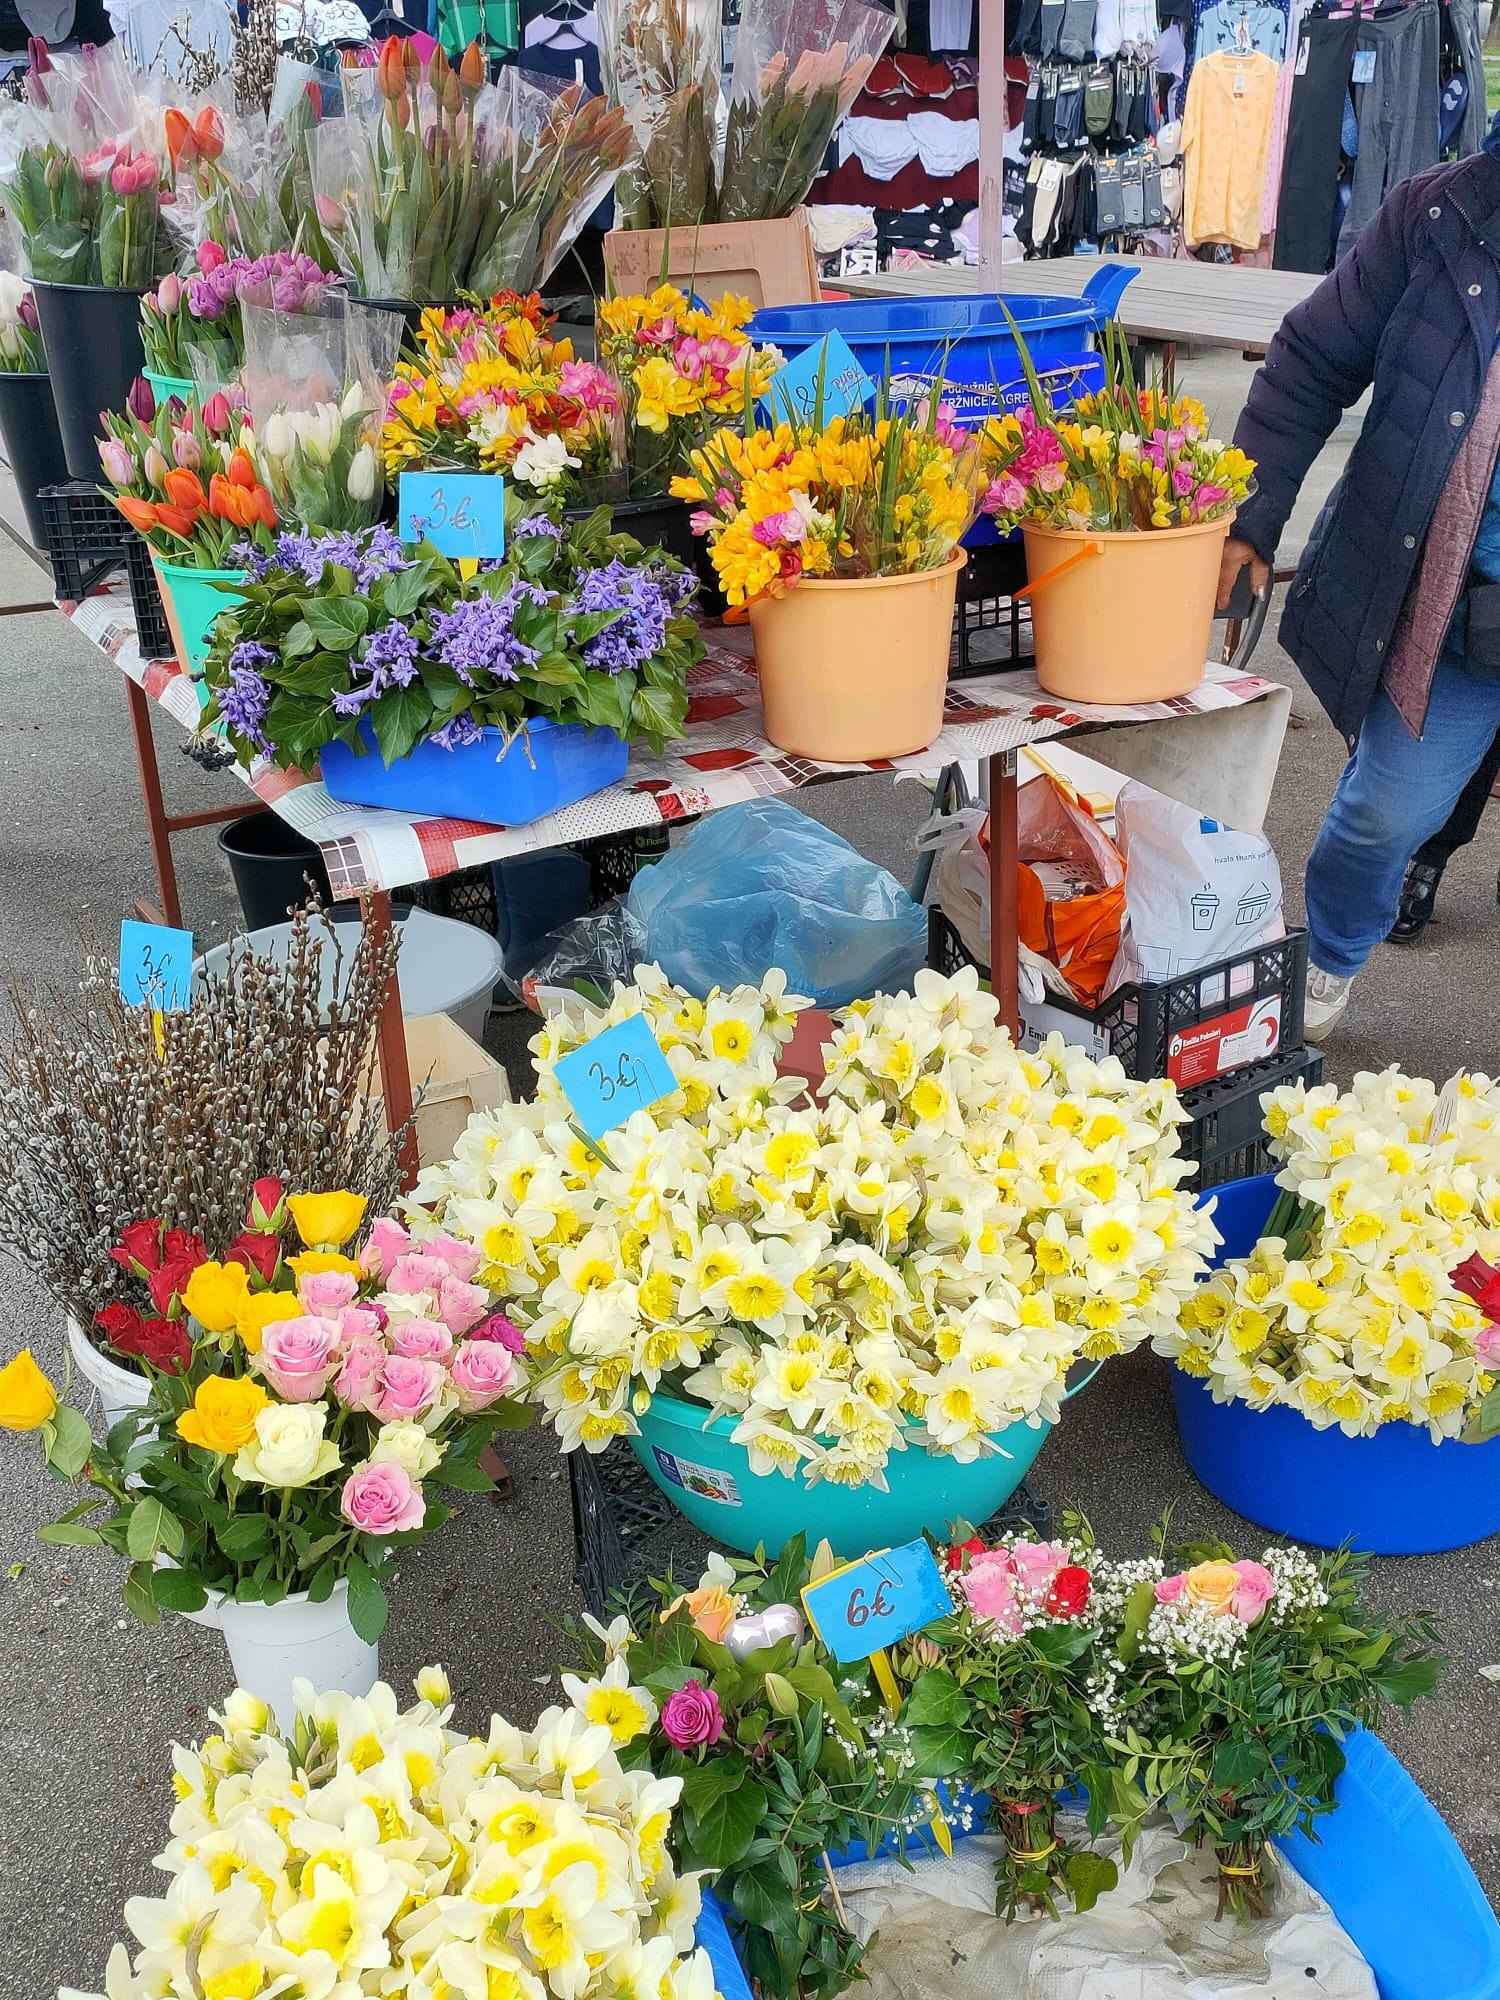 Cost of fresh flowers at an outdoor market.